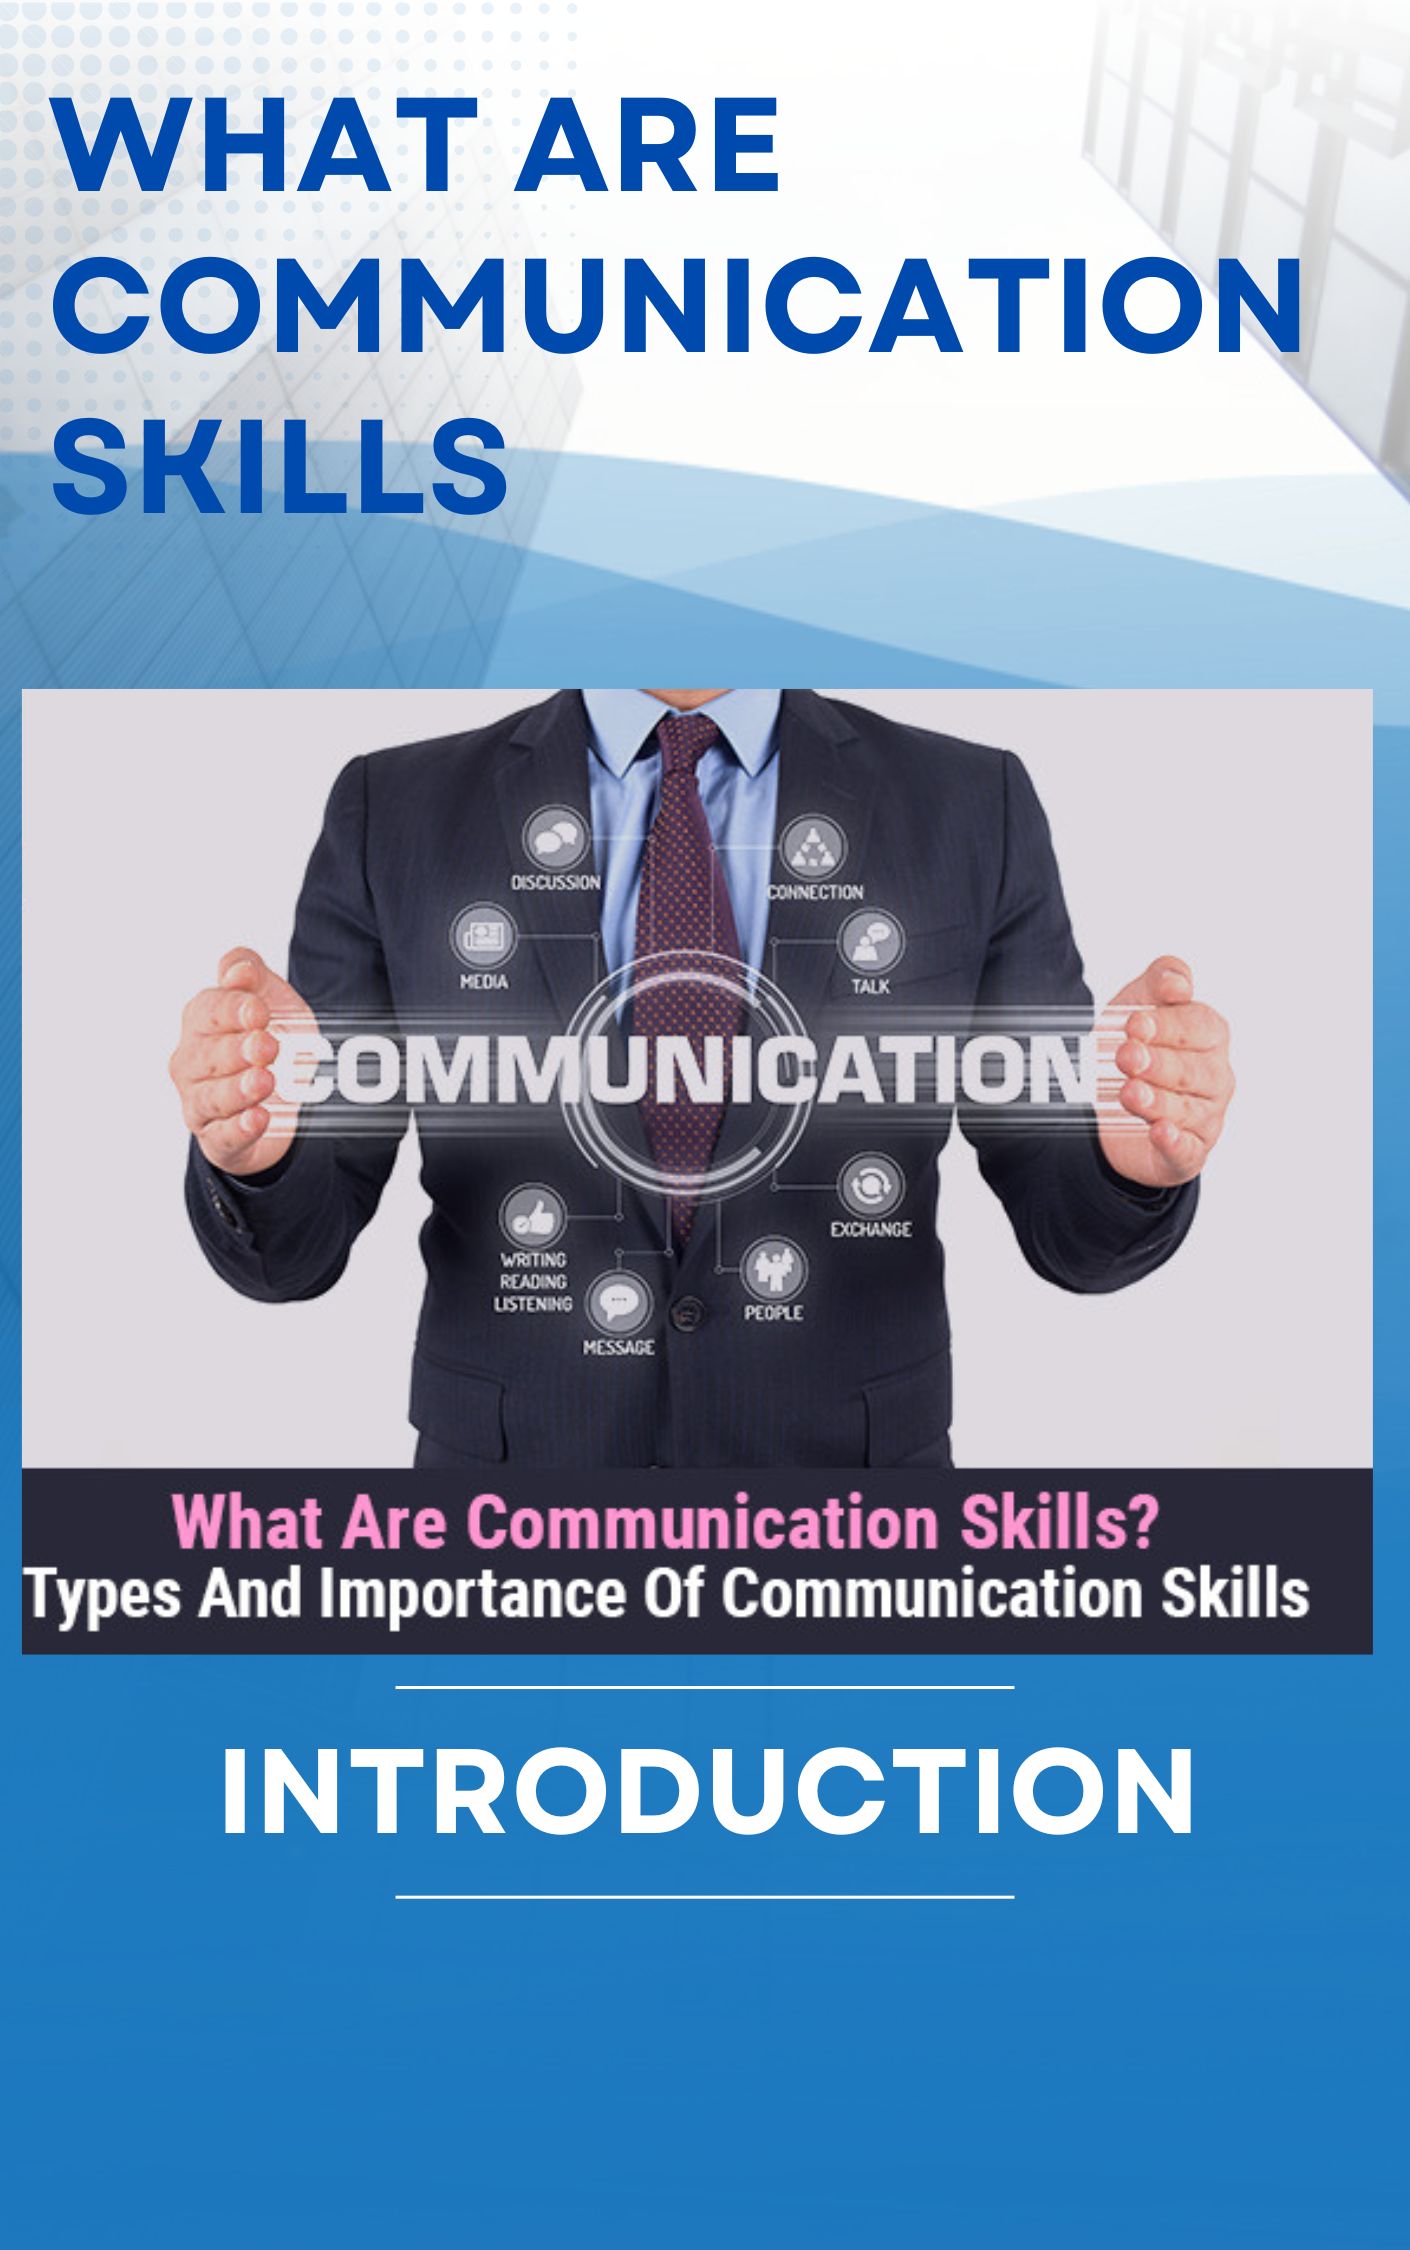 What are communication skills